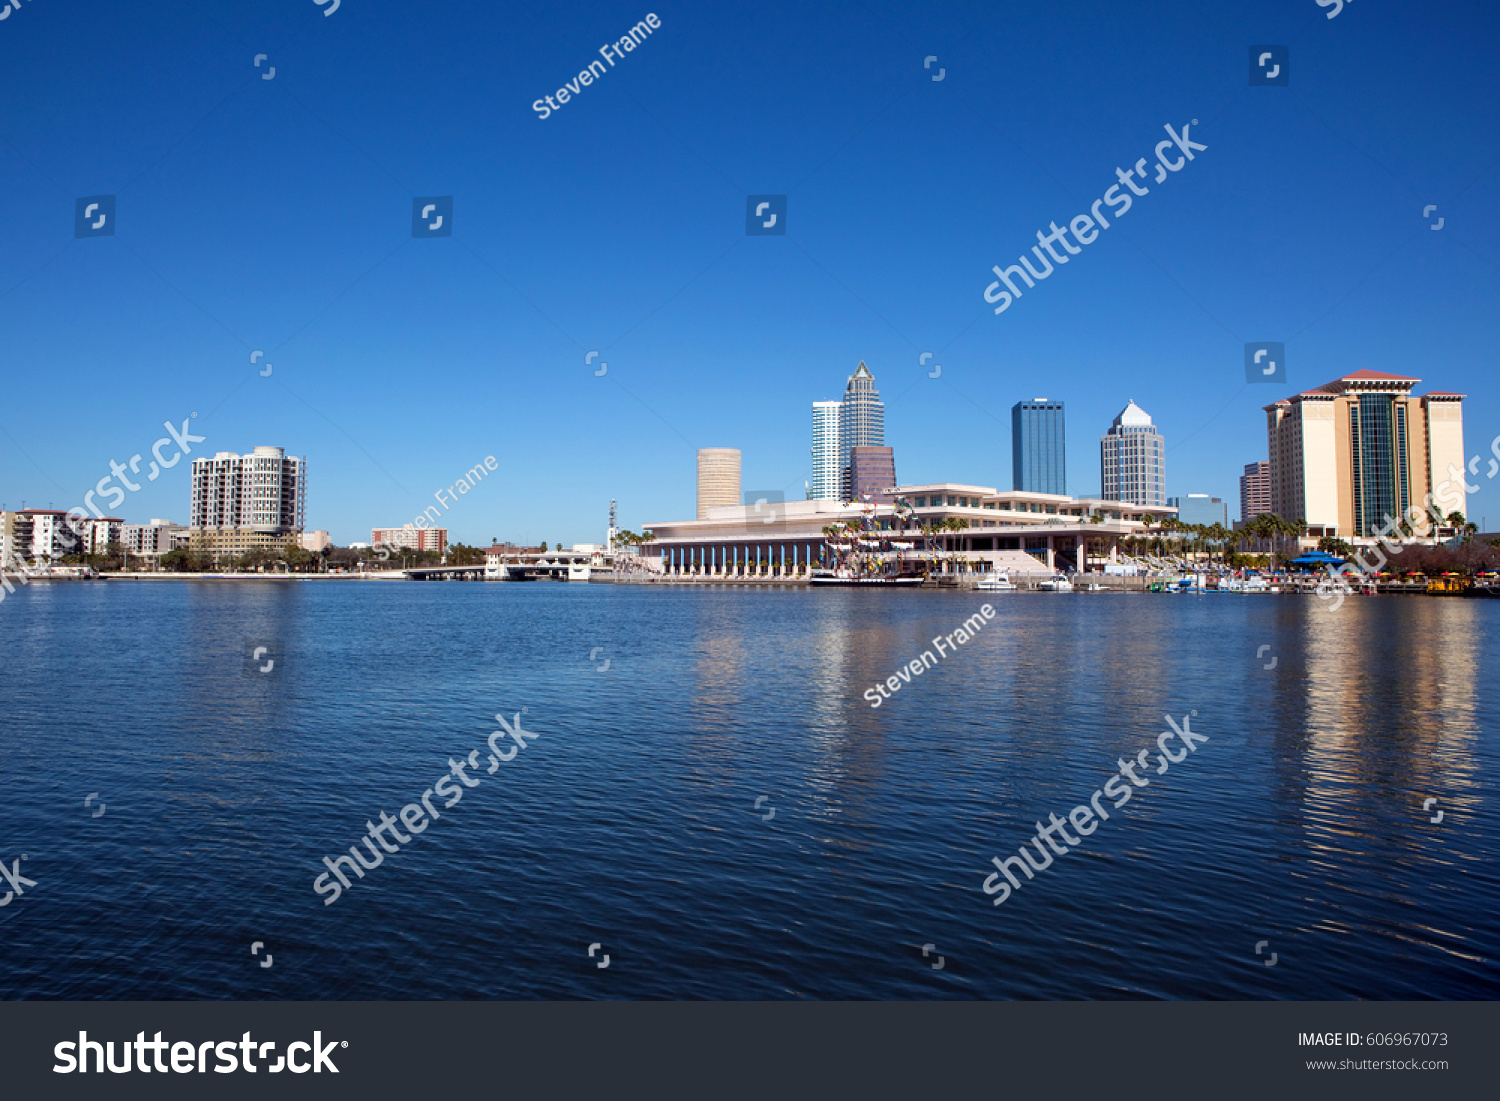 View Tampa Convention Center City Skyline Stock Photo 606967073